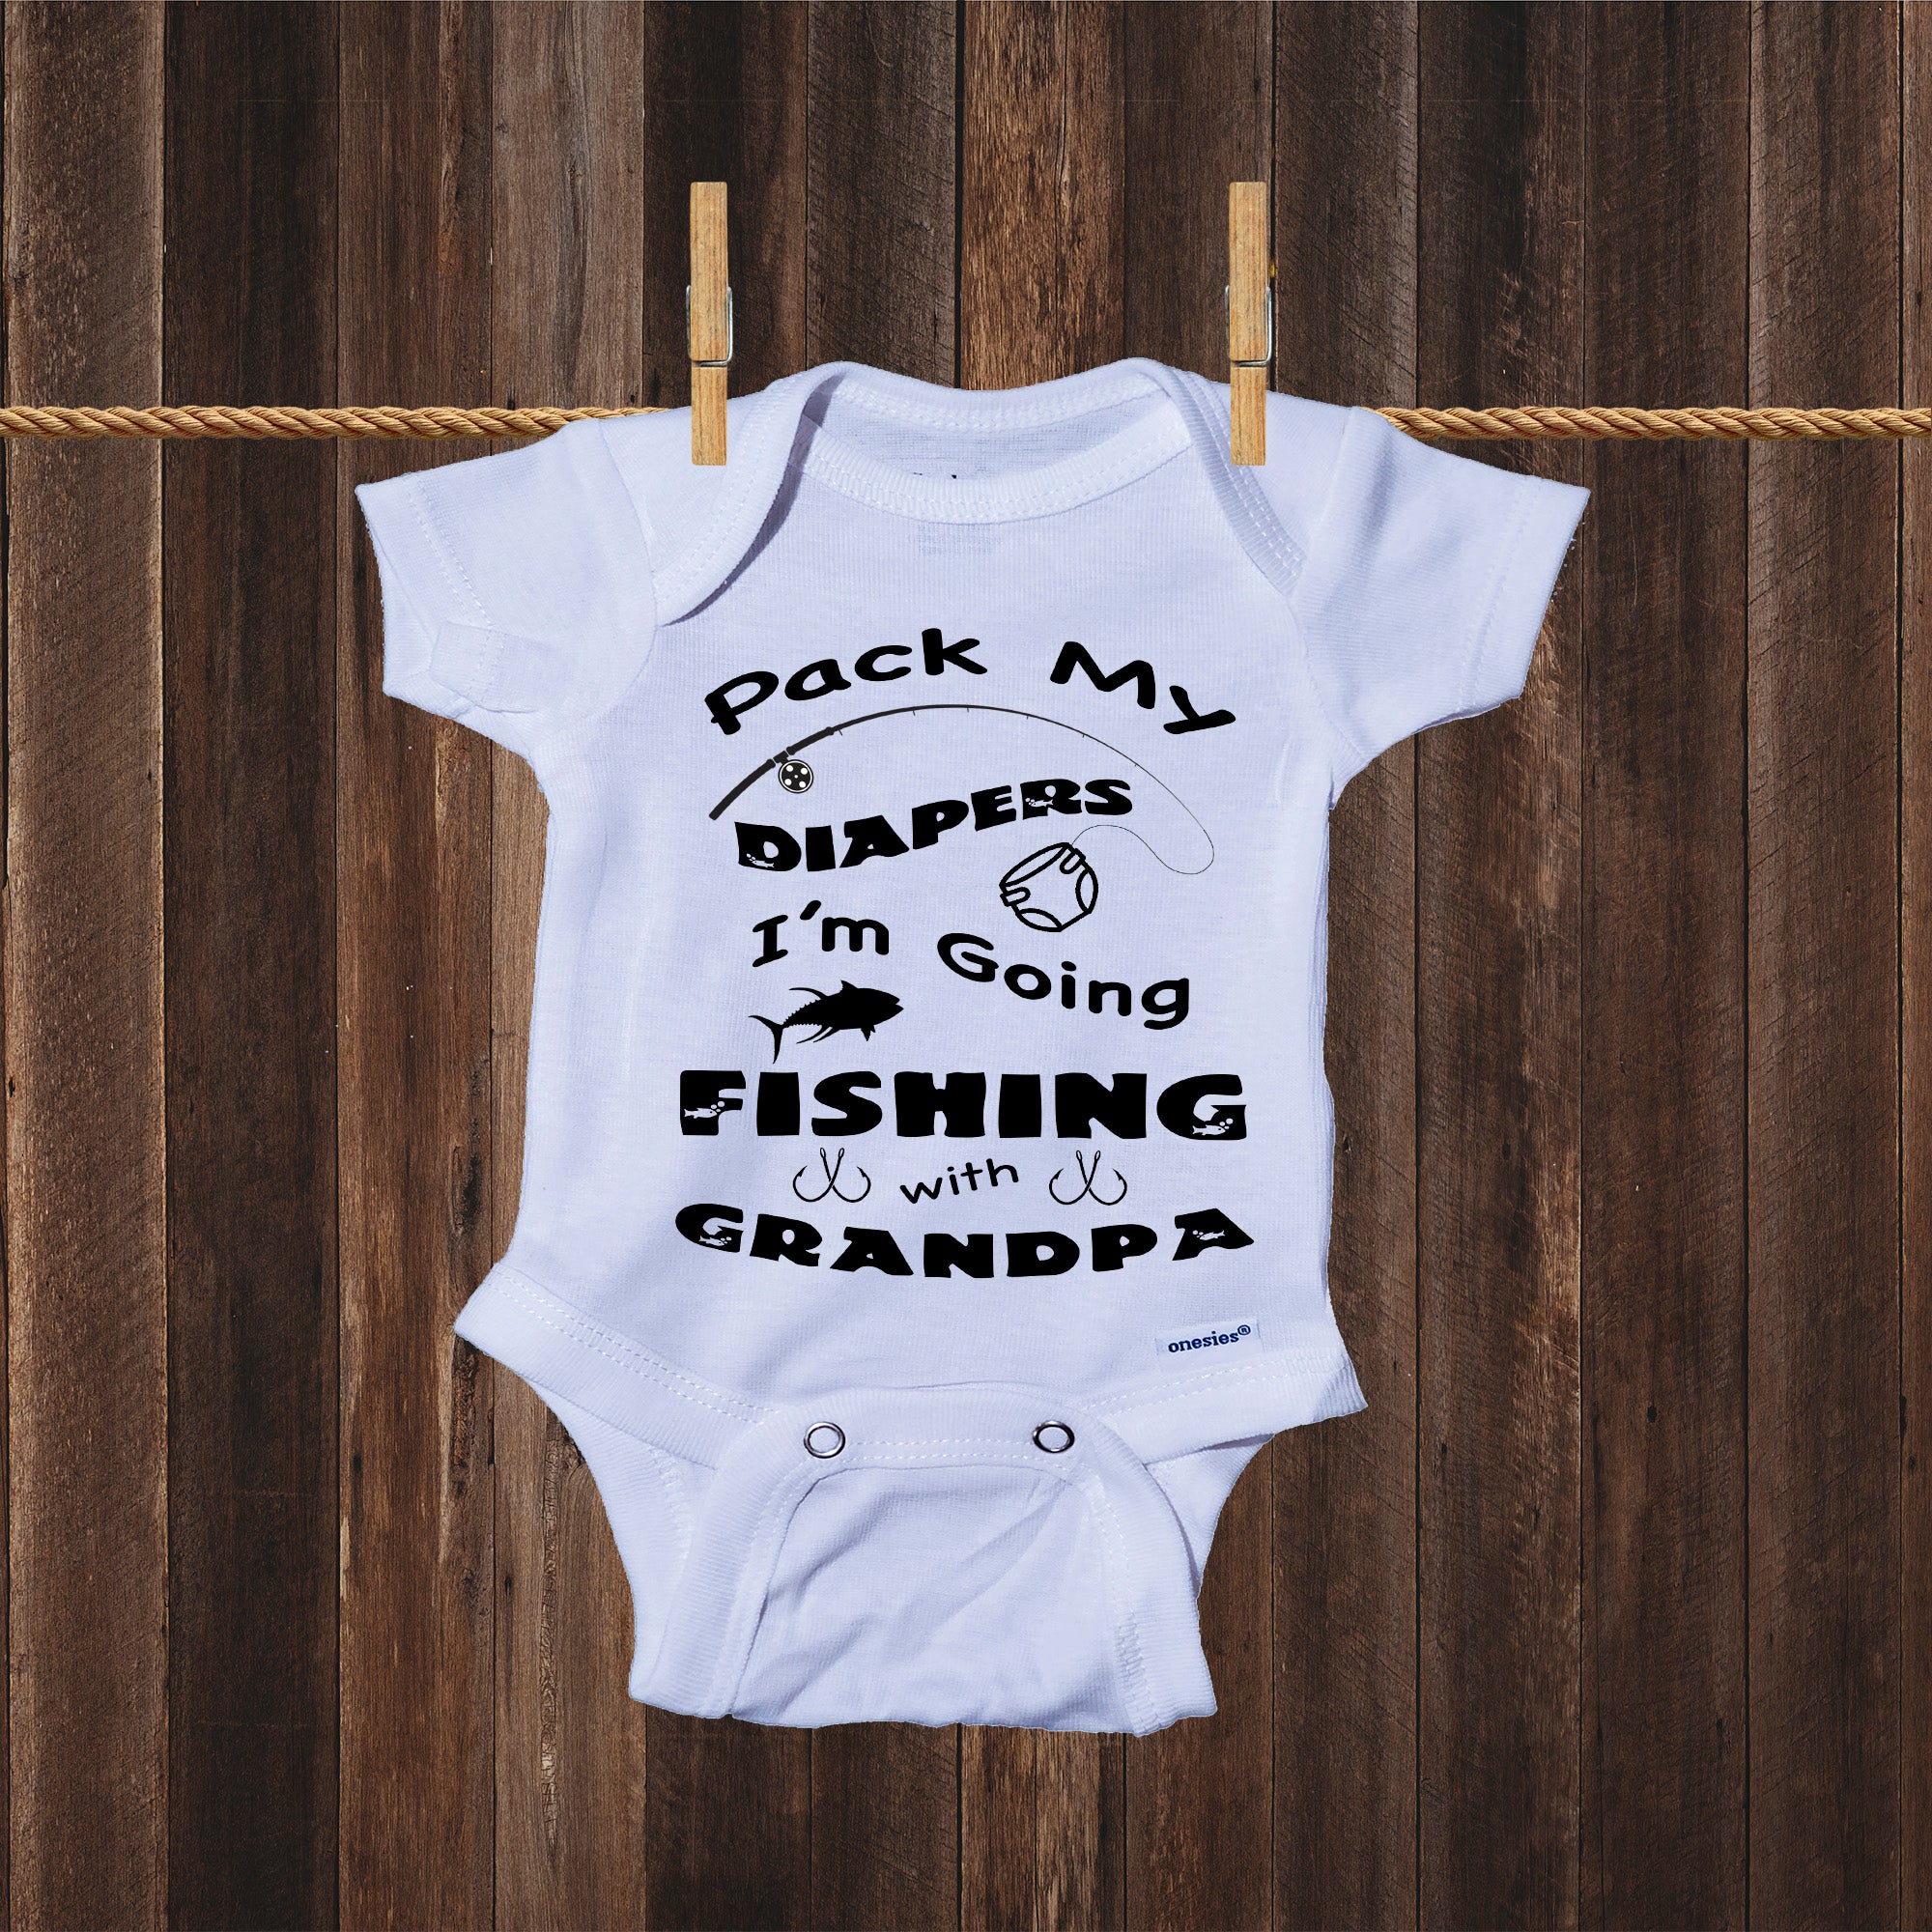 Grandpa's Fishing Buddy, Funny Baby Shower Gift, Grandfather Toddler Shirt, Grandson  Granddaughter Baby Announcement, Fishing With Grandpa 